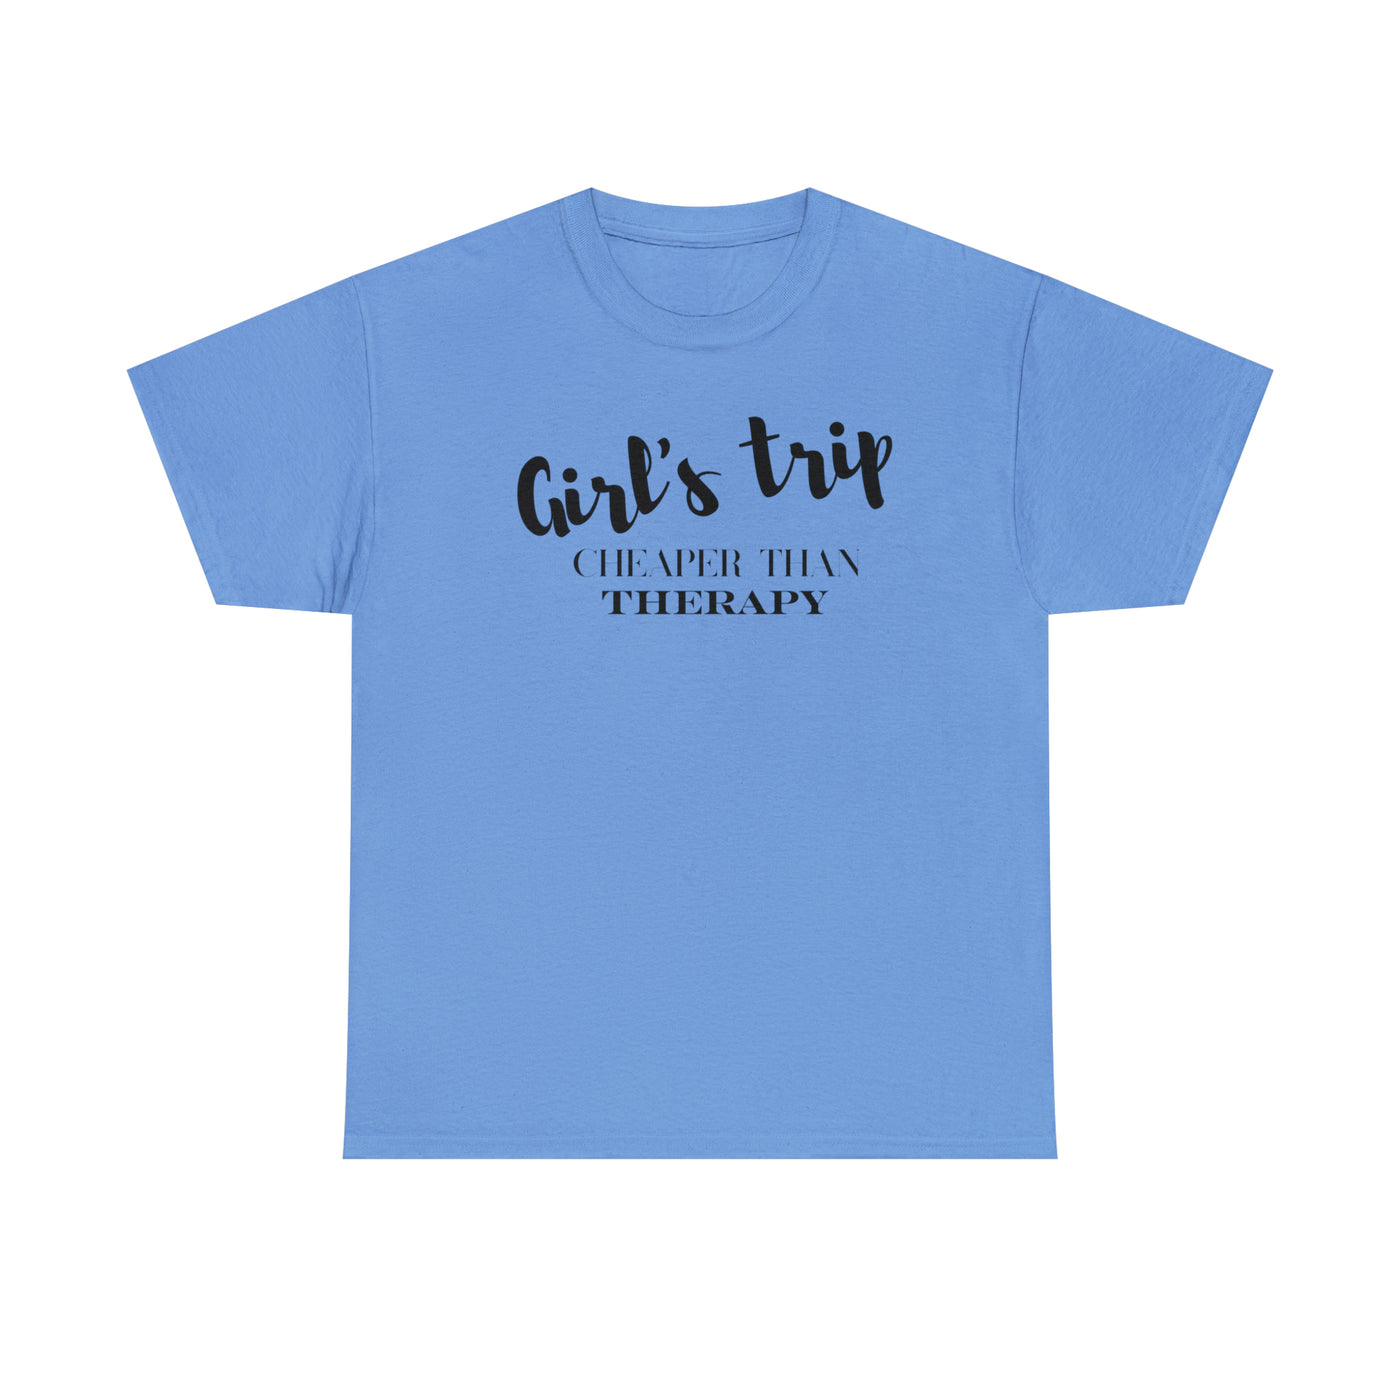 Girls Trip Cheaper than Therapy Unisex Heavy Cotton Tee